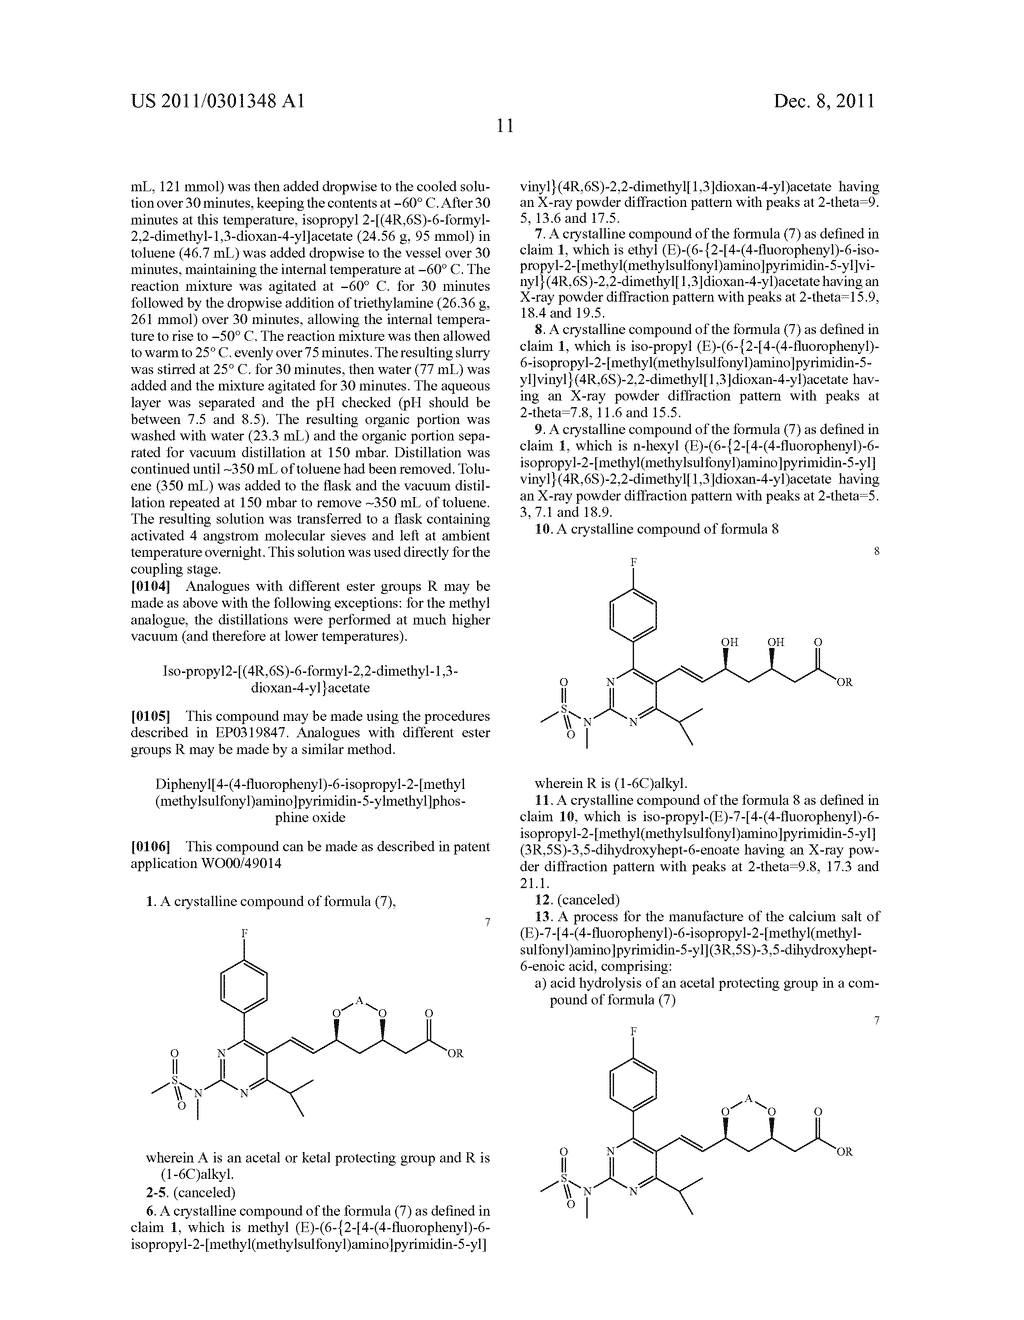 Process for the Manufacture of the Calcium Salt of Rosuvastatin     (E)-7-[4-(4-Fluorophenyl)-6-Isopropyl-2-[Methyl(Methylsulfonyl)Amino]-Pyr-    imidin-5-yl](3R,5S)-3,5-Dihydroxyhept-6-Enoic Acid and Crystalline     Intermediates Thereof - diagram, schematic, and image 20